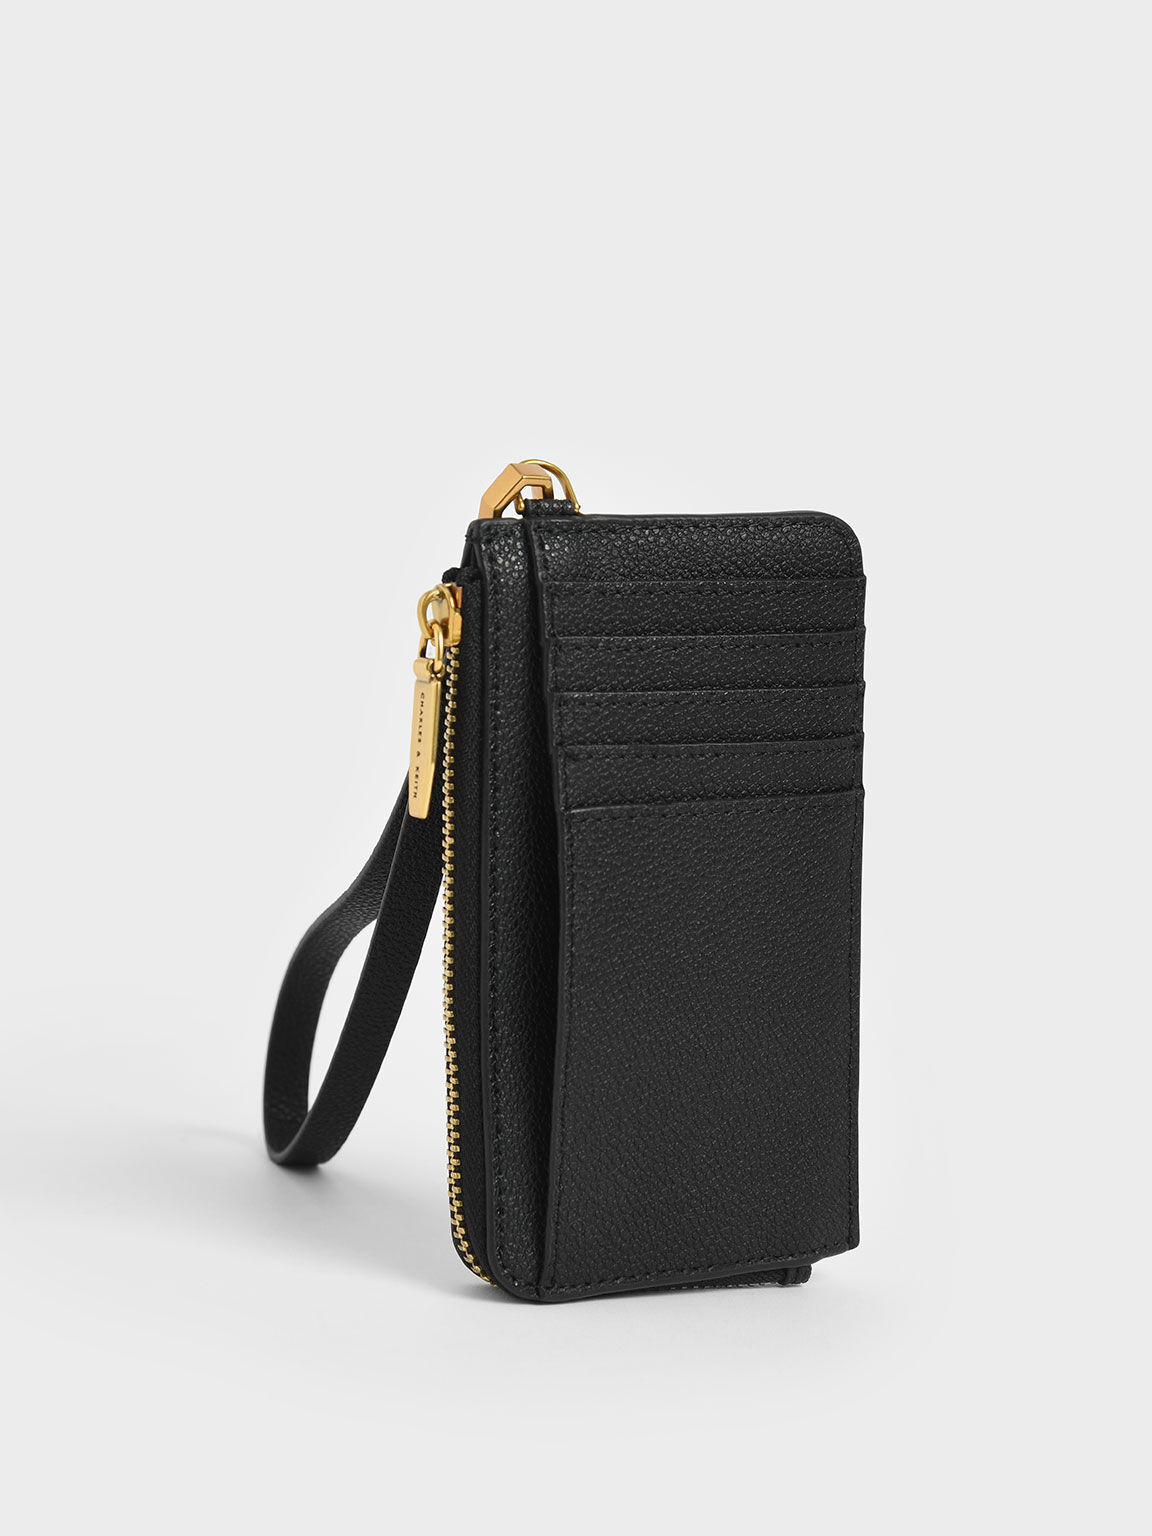 Charles & Keith card holder bag in black with gold chain strap